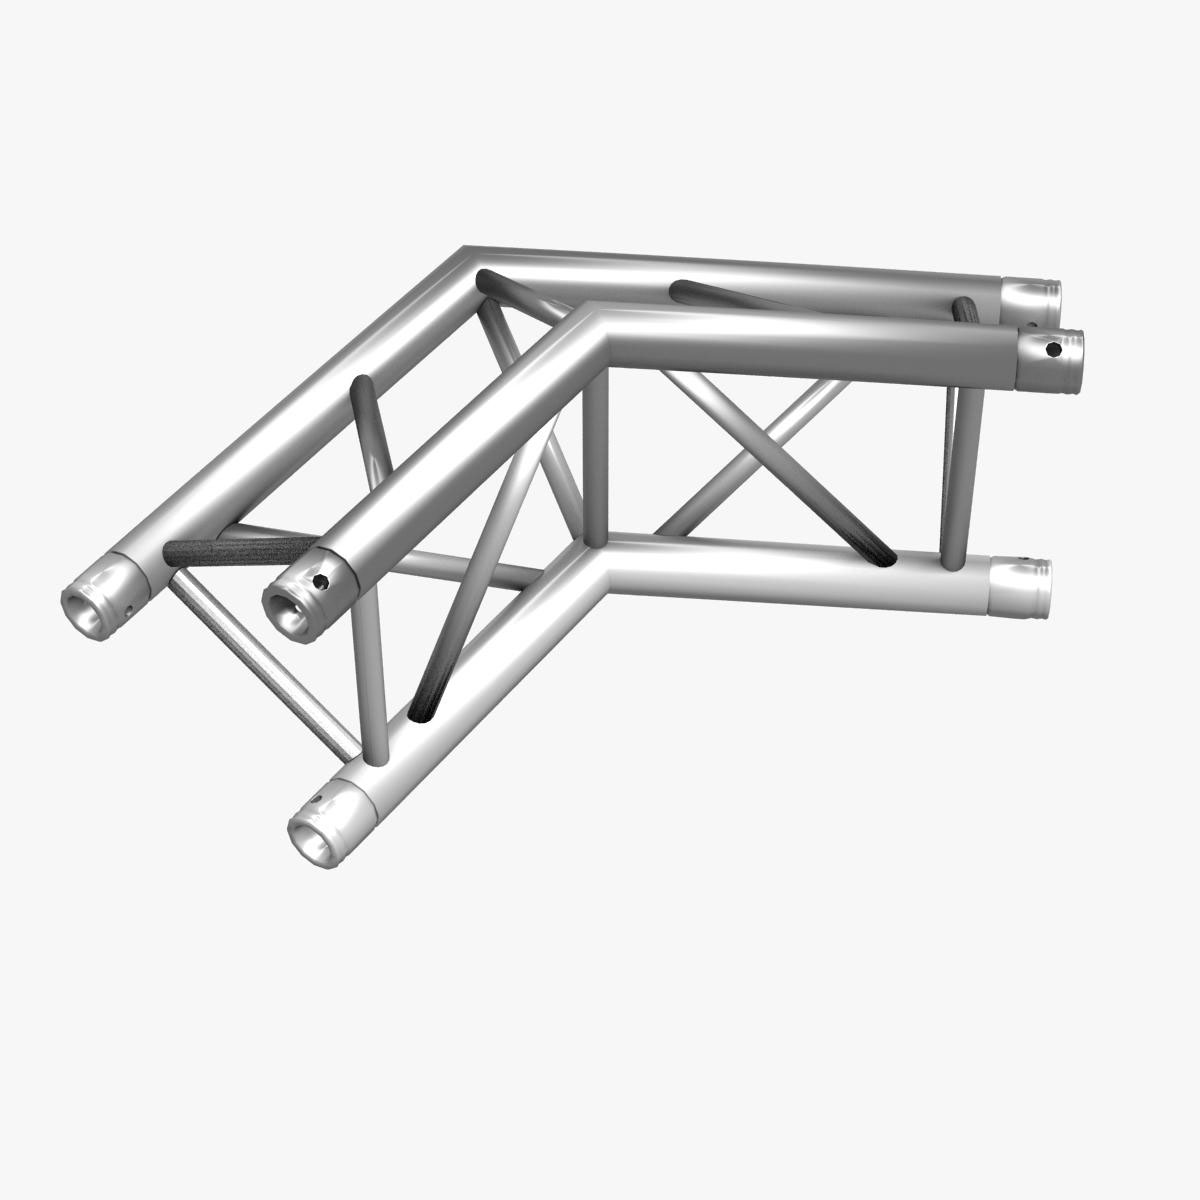 truss system part Stage Stand scaffold studio structure Stage trusses beams building material lighting